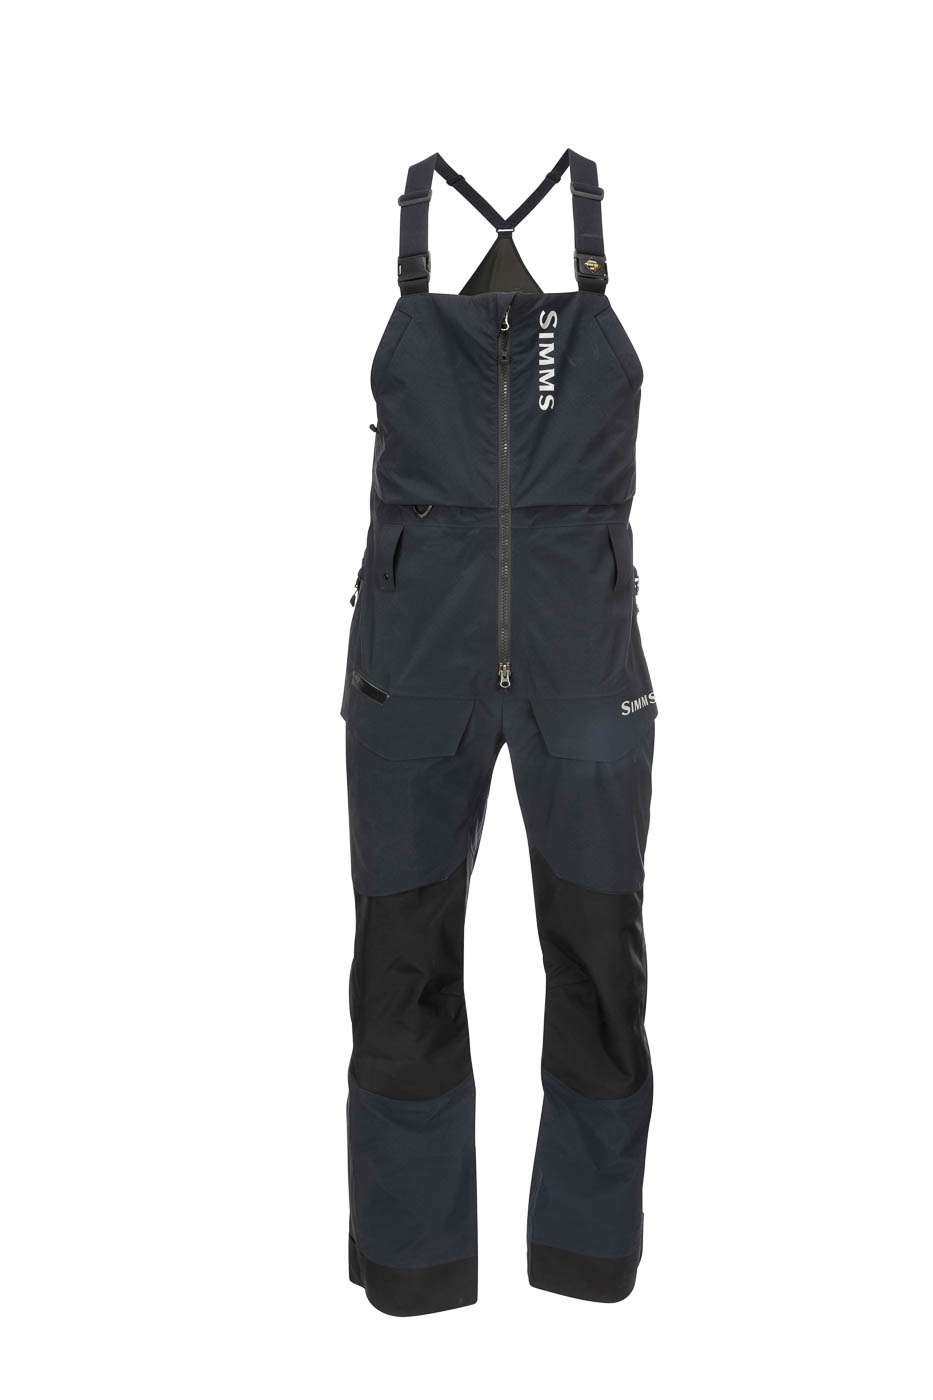 <p><strong>Simms Pro Dry Bib</strong></p><p>The GORE-TEX Pro durable waterproof fabric, combined with abrasion resistant overlay panels, provides increased durability in the knees and rear seat. A full length, two-way center front zip-up with adjustable suspenders and a stretch back panel provide ease in wear and all-day comfort. The cargo handwarmer pockets have an adjustable waist cinch, and drain ports are lined with brush tricot for cold-weather warmth. Top loading welted thigh pockets, complete with a plier holder, add to the convenience factor. Thigh-high, two-way zippers make putting on and taking off a breeze when wearing boots, and articulated leg panels with Oxford Nylon backing add to comfort and durability. $599.95. <a href=